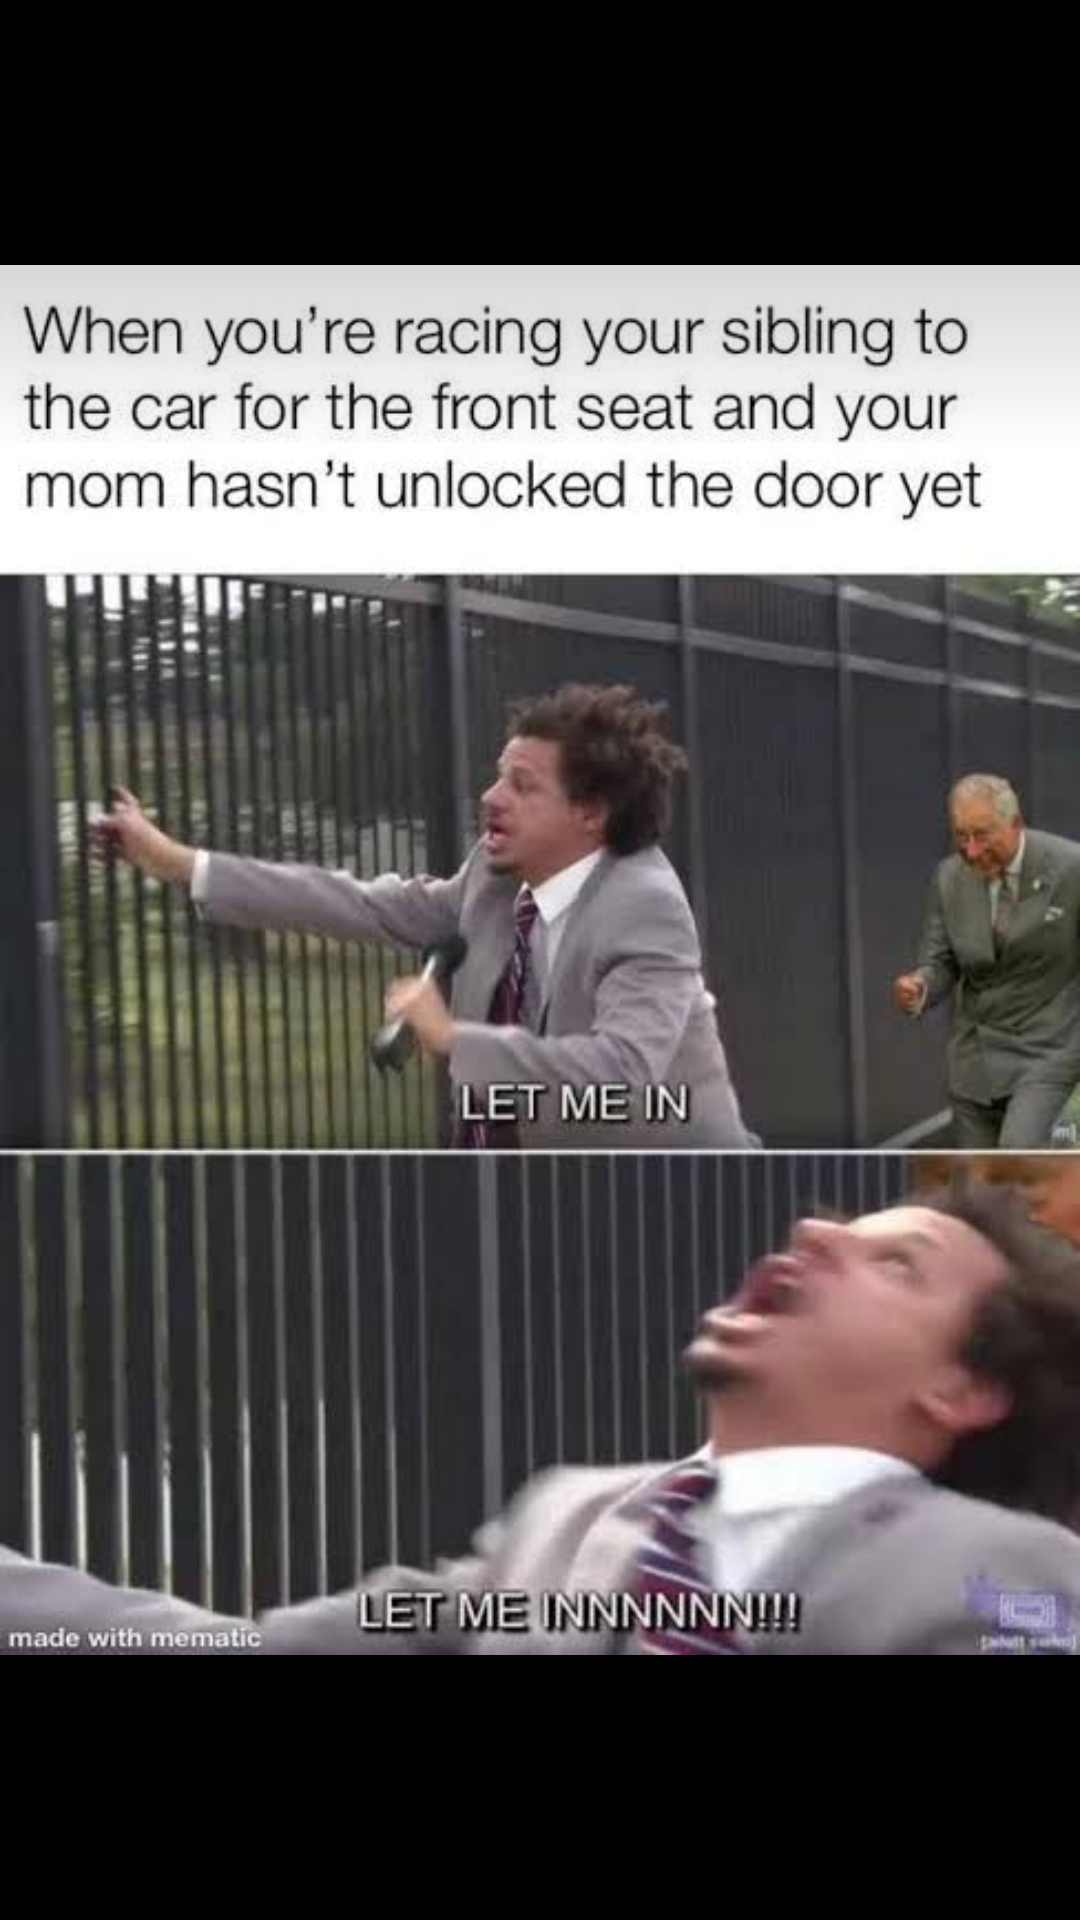 funny memes 2019 - When you're racing your sibling to the car for the front seat and your mom hasn't unlocked the door yet Let Me In Let Me Innnnnn!!! made with mama